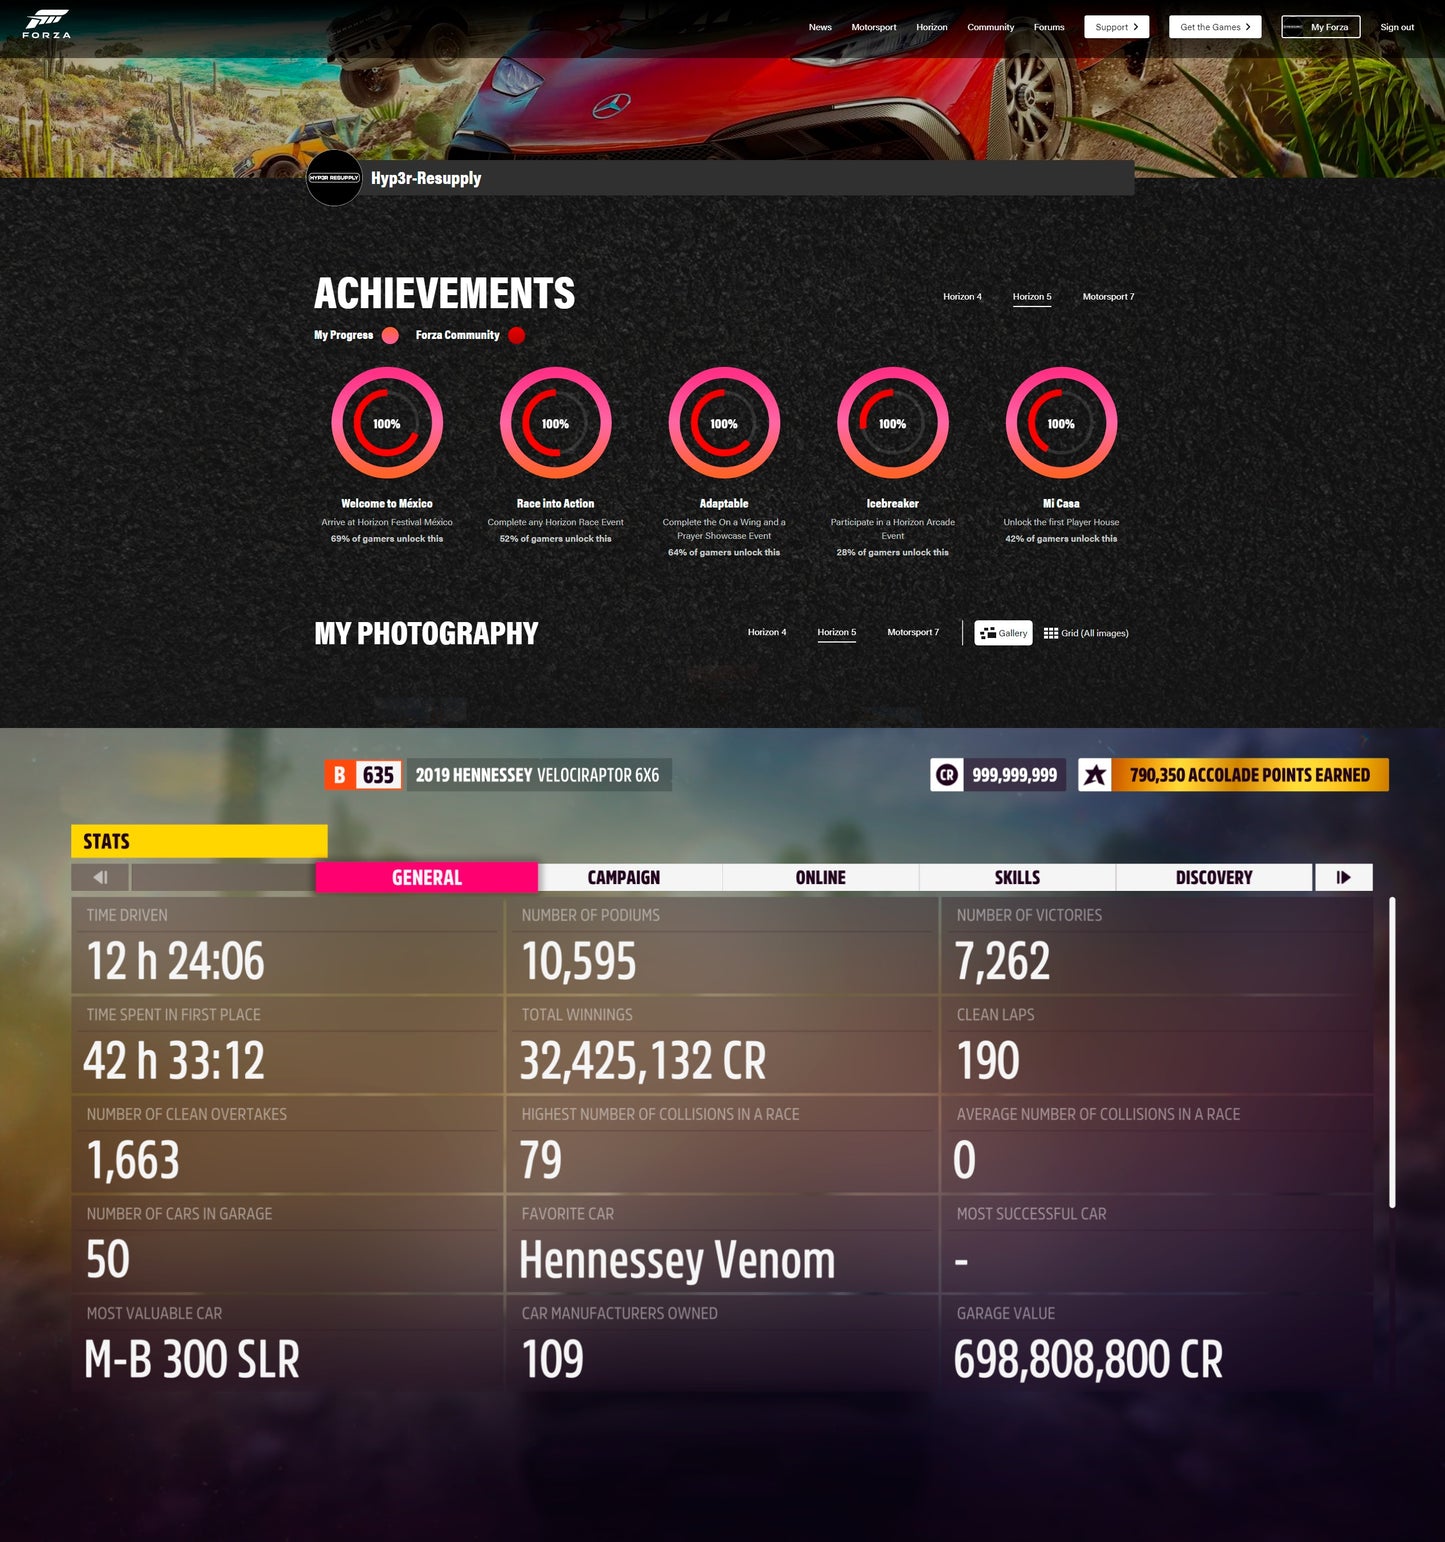 Forza Horizon 5 Modded Account - [All Cars (Last Series Included) + 999.999.999: Credits & Super Wheelspin & Wheelspin & Car Points & Forzathon Points + Level + 100% Progress]